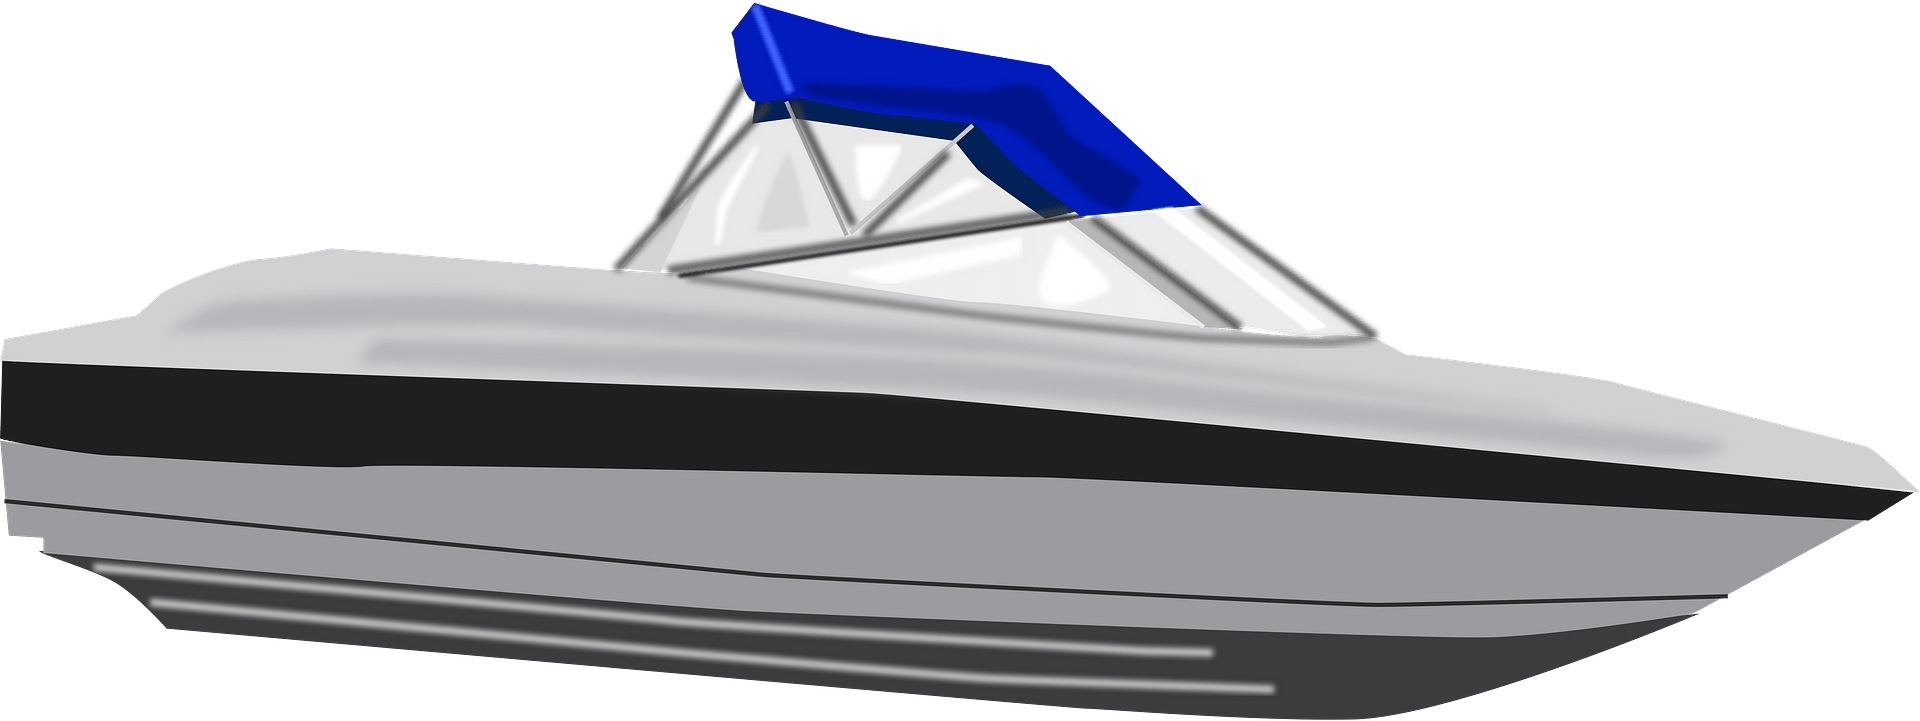 Motorboat Vector Art, Icons, and Graphics for Free Download - Clip Art ...